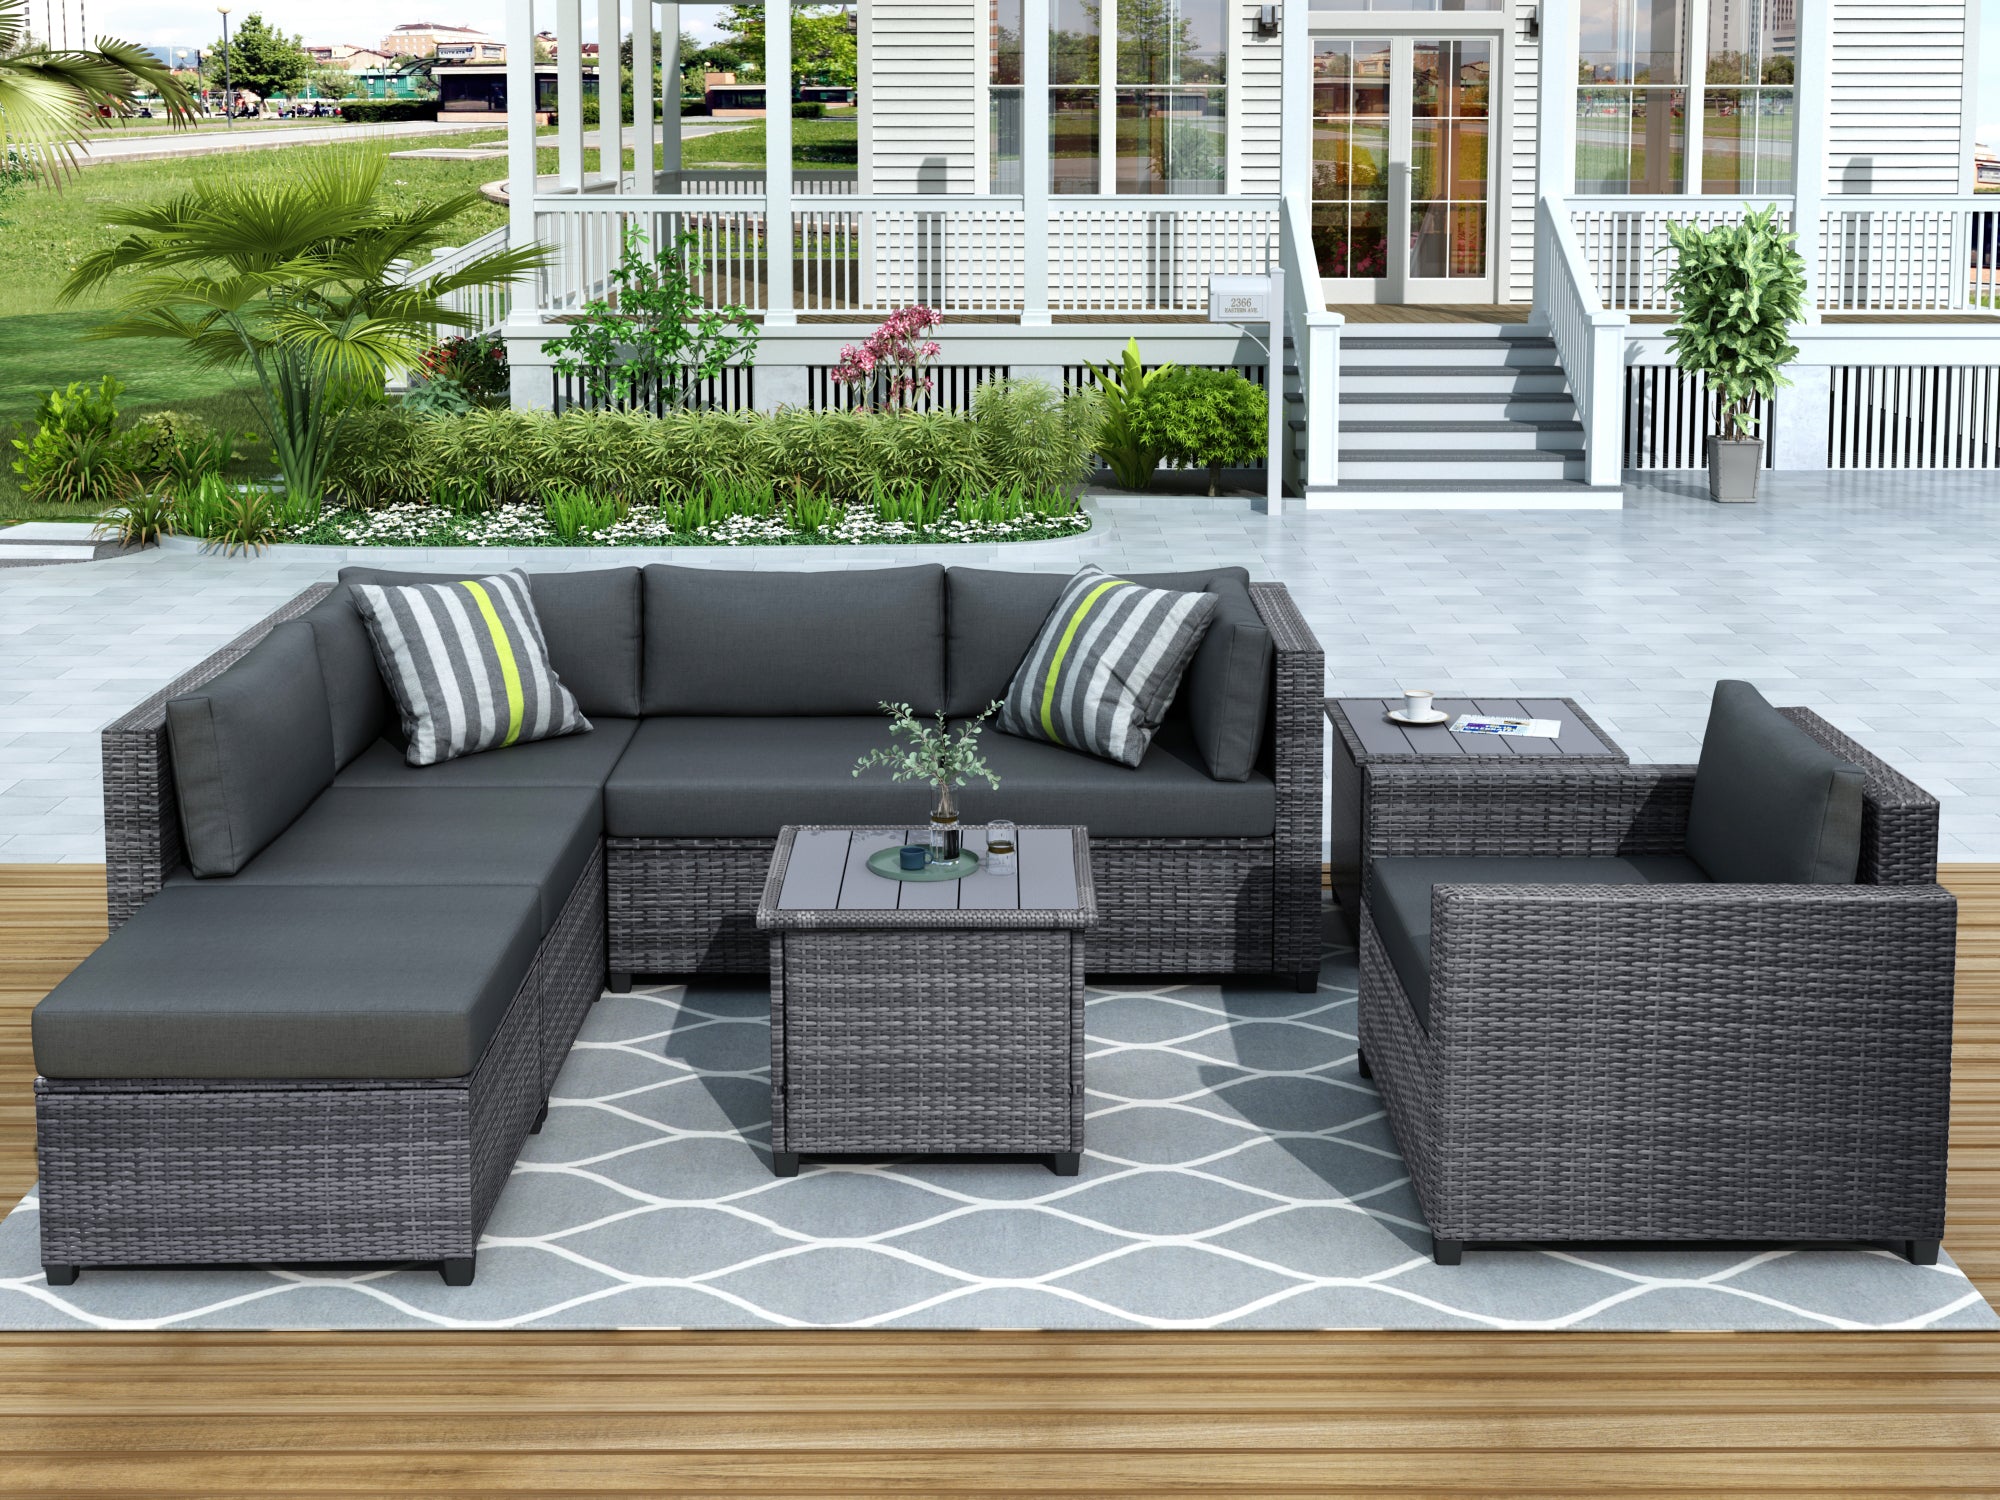 8 Piece Rattan Sectional Seating Group with Cushions Patio Furniture Sets (Gray)